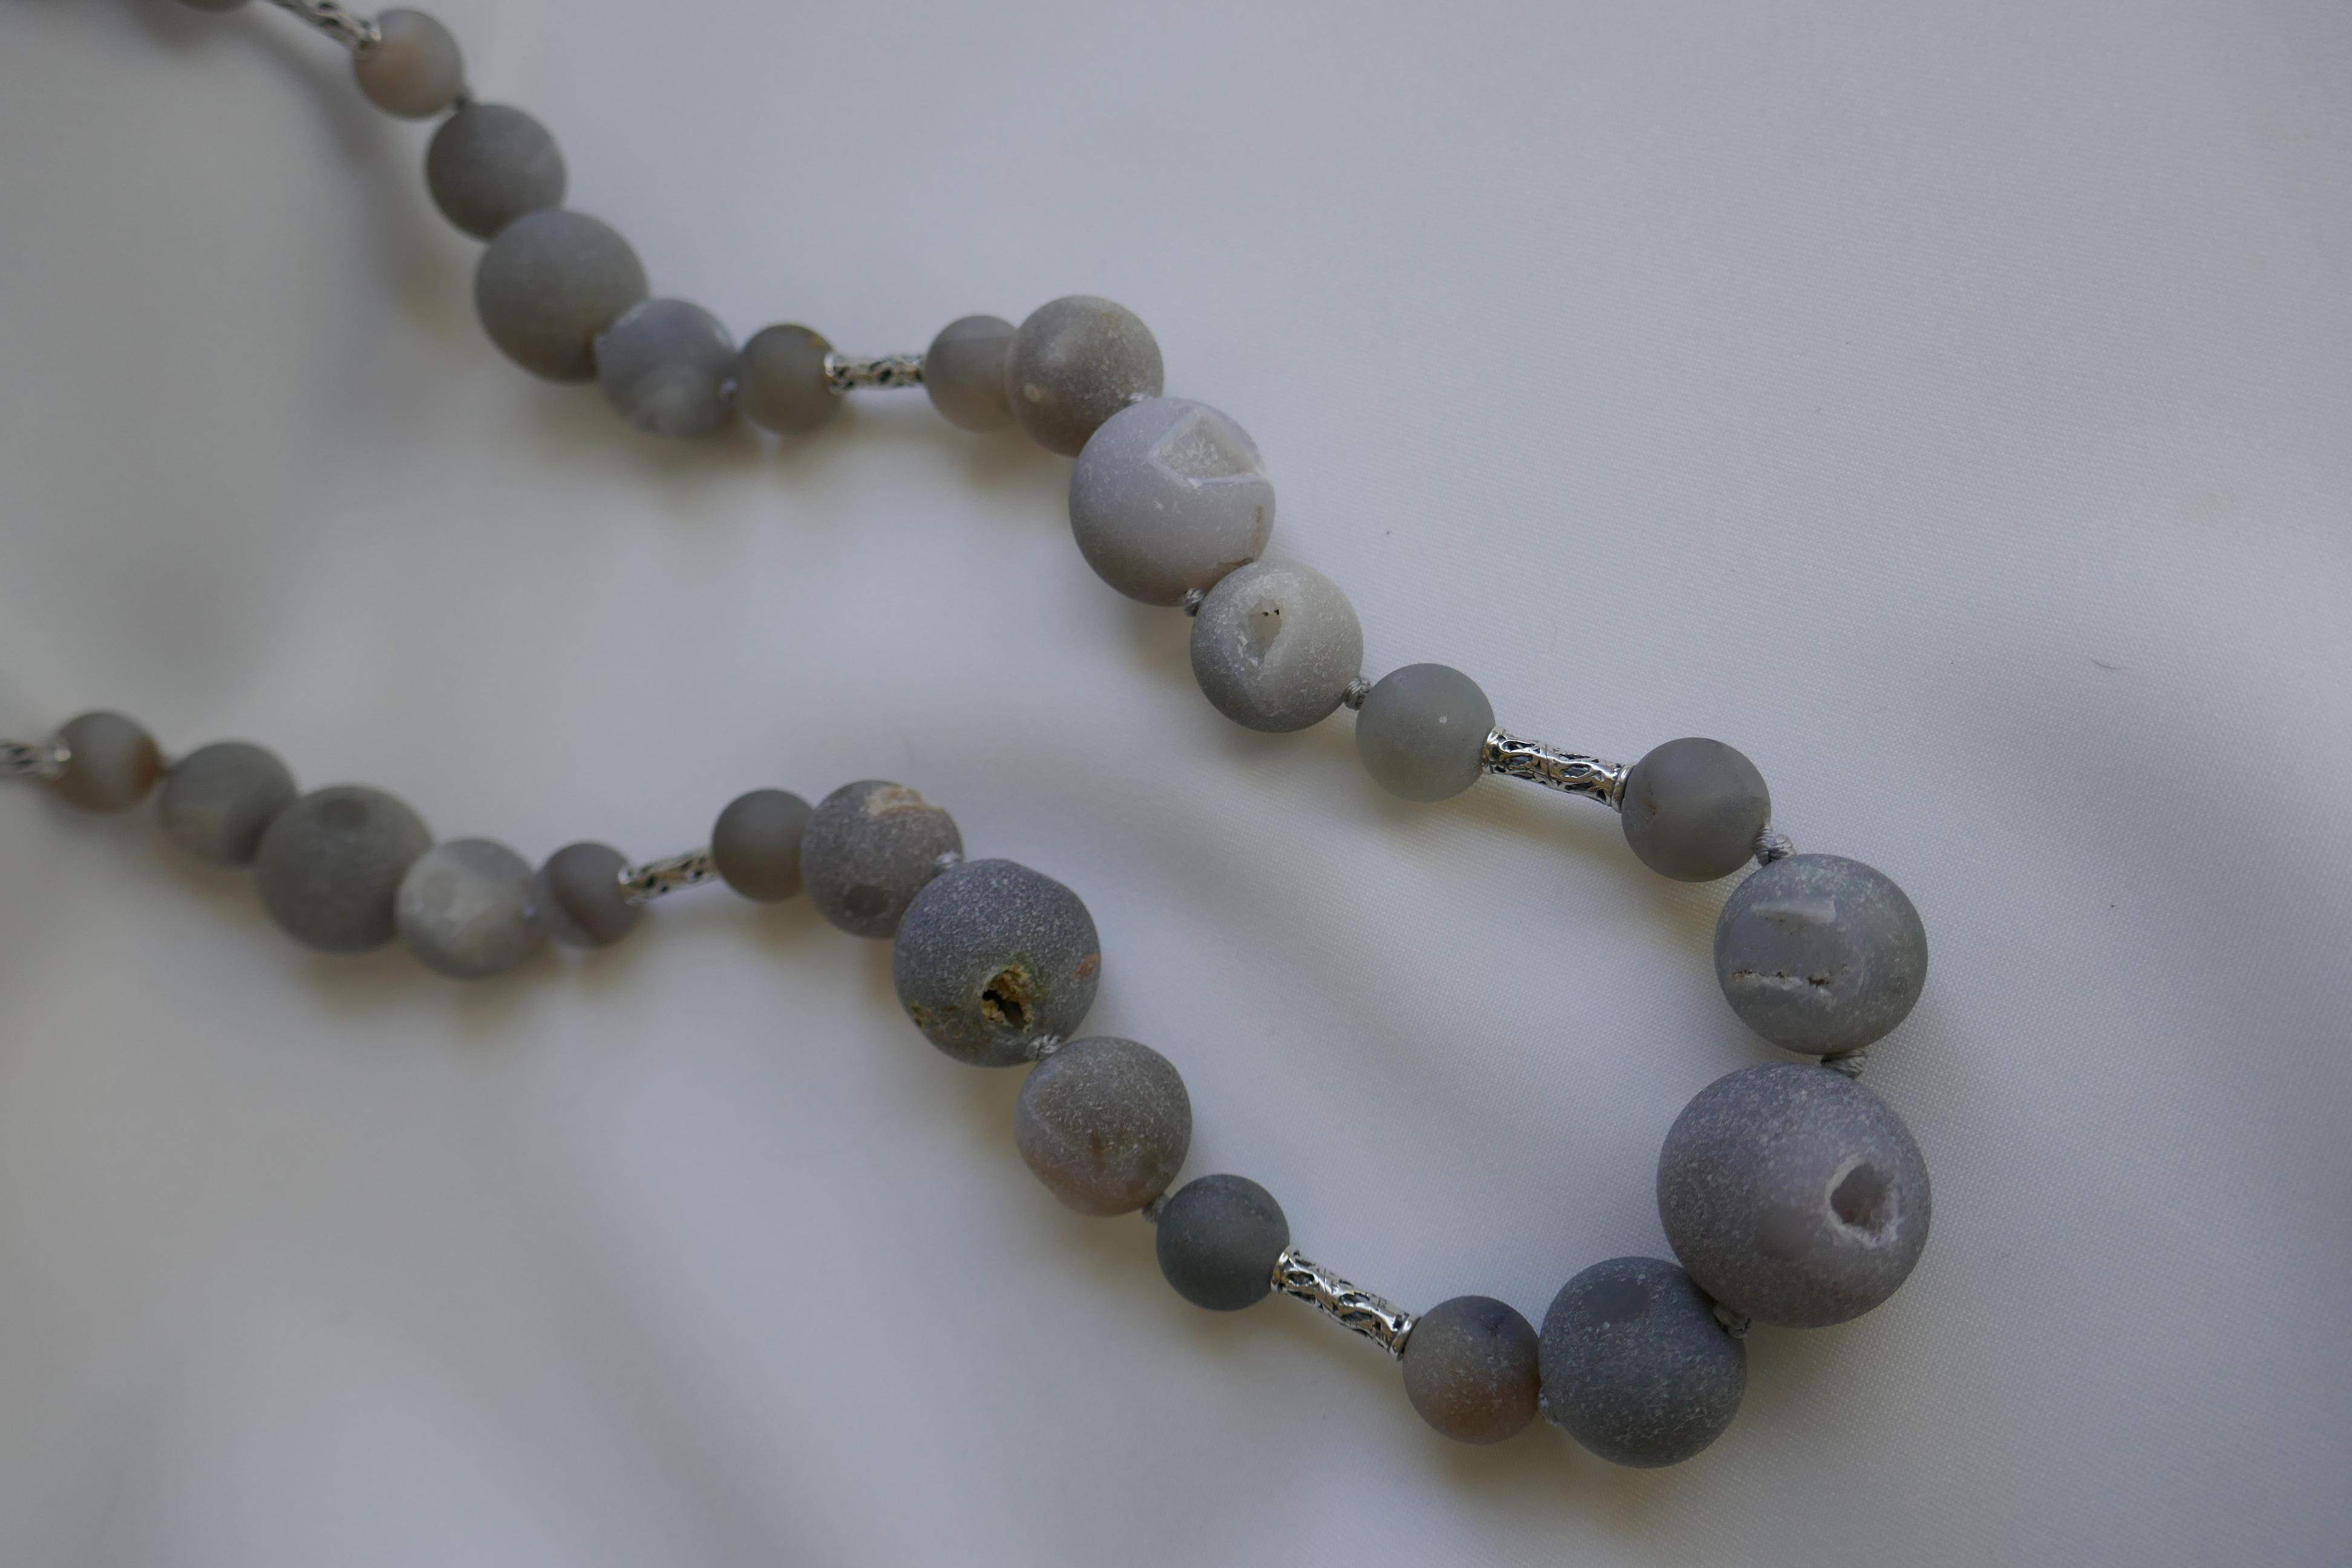 The grey druzy quartz beads are in three different sizes 200mm, 16mm, and 12mm. They are interspersed with carved sterling silver tubes and also has a 925 sterling silver clasp.  The color of these stones make it very wearable year round. It may be